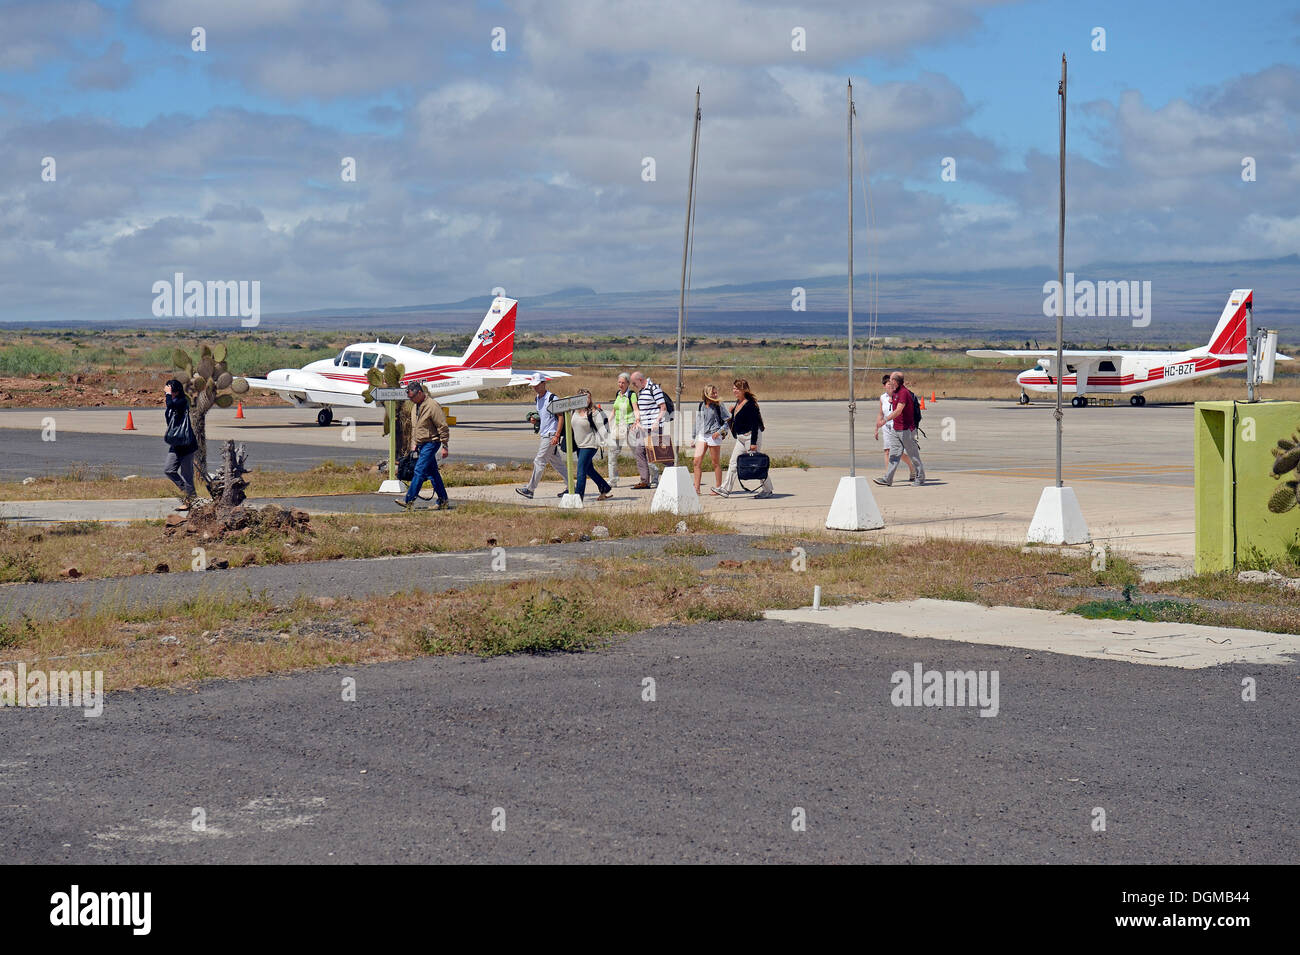 Tourists getting of a plane of AeroGal airlines at Baltra airport island, Galapagos, Ecuador, South America Stock Photo